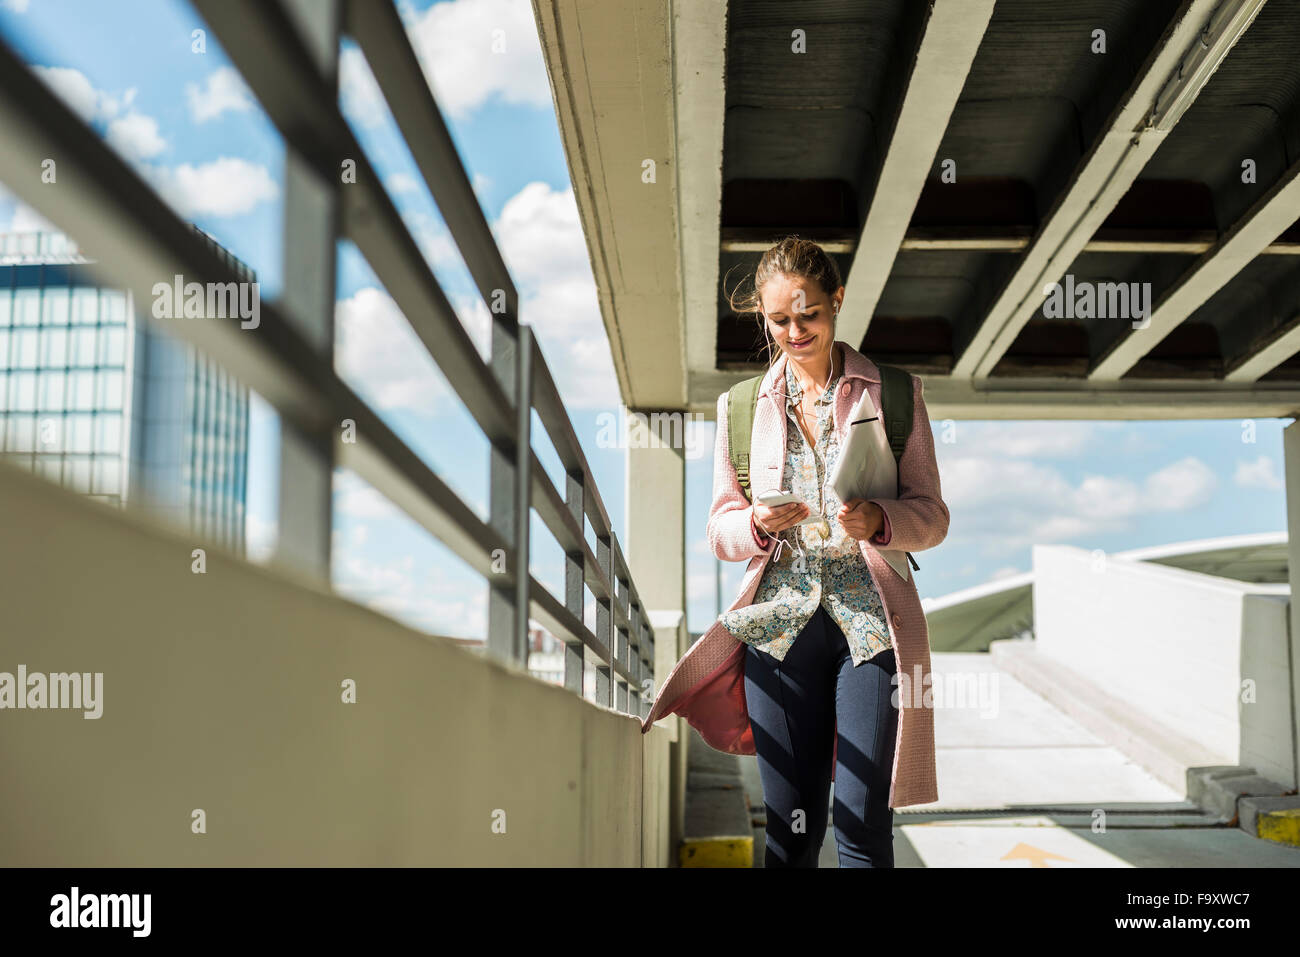 Young woman with earbuds and cell phone in parking garage Stock Photo